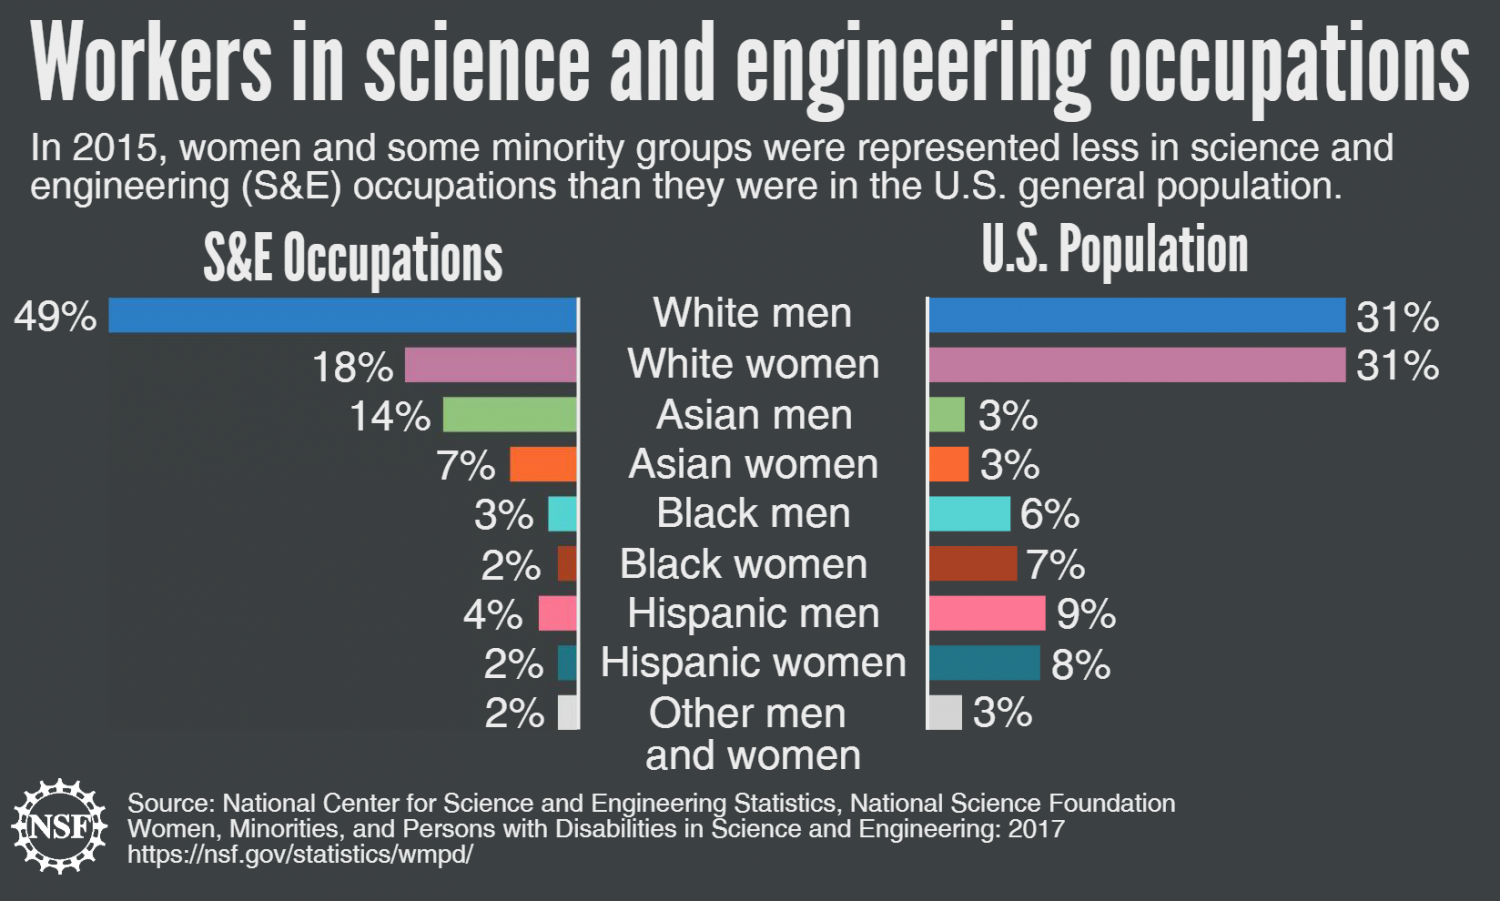 Women, Minorities and Persons with Disabilities in Science and Engineering  report released